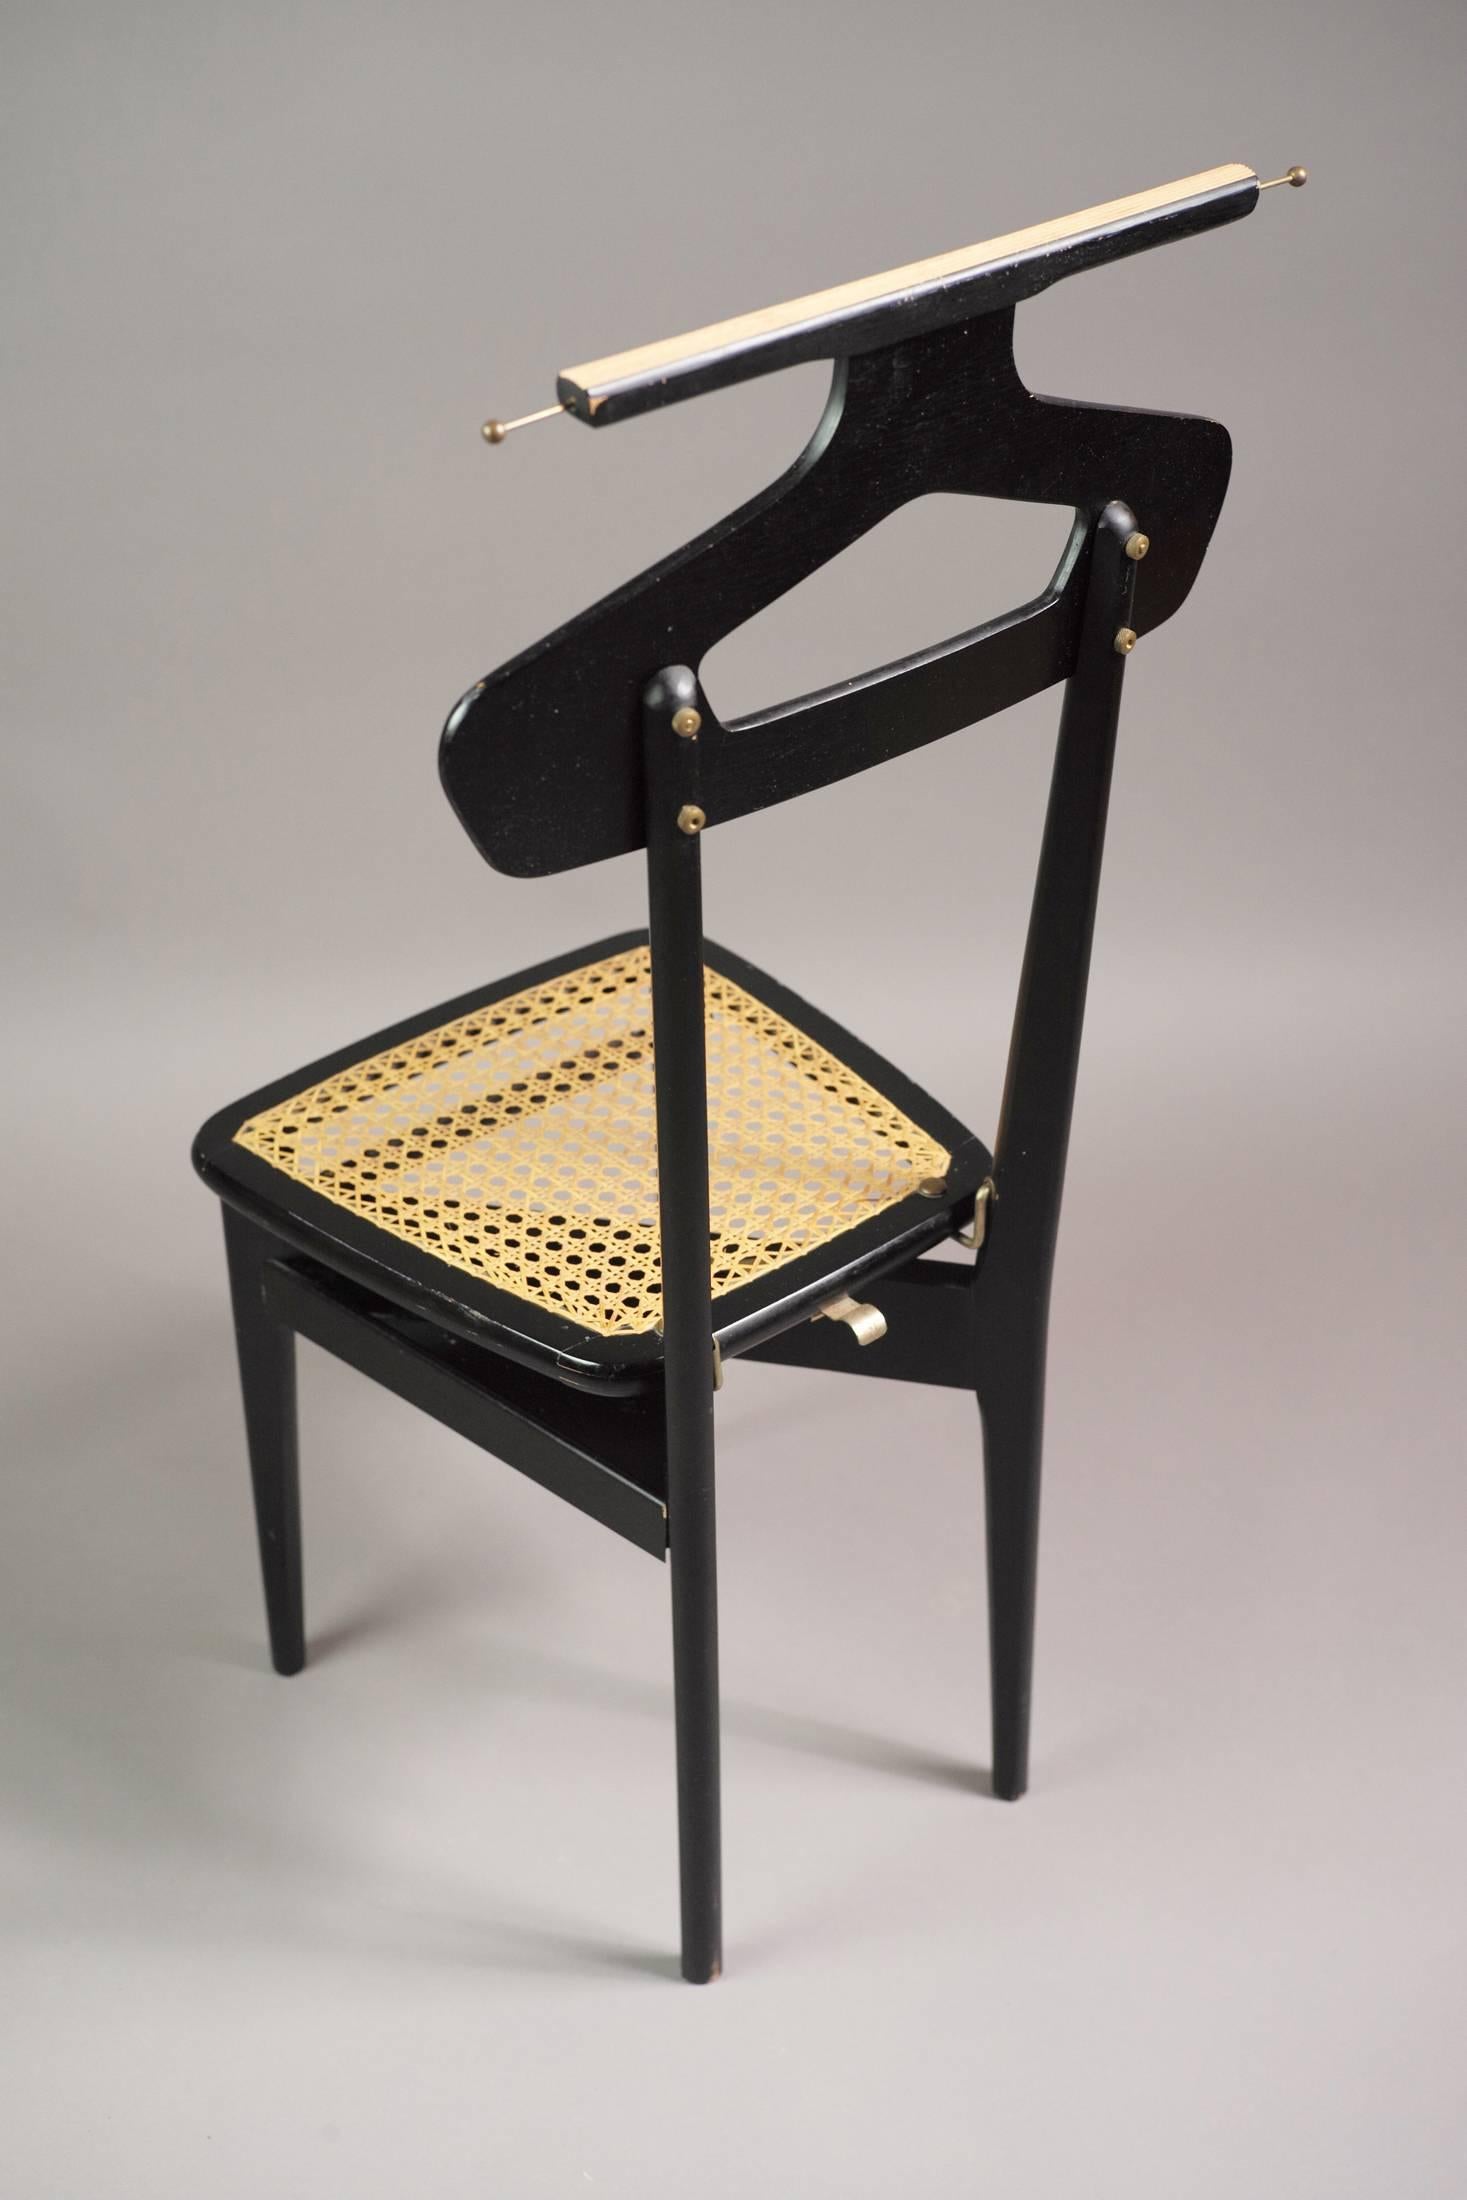 This valet was produced by the Italian design house Fratelli Reguitti in Italy, circa 1950. It is made from ebonized wood with a removable cane seat. It has four brass nuts and bolts, two retractable tie hooks and a spring that allows the raised